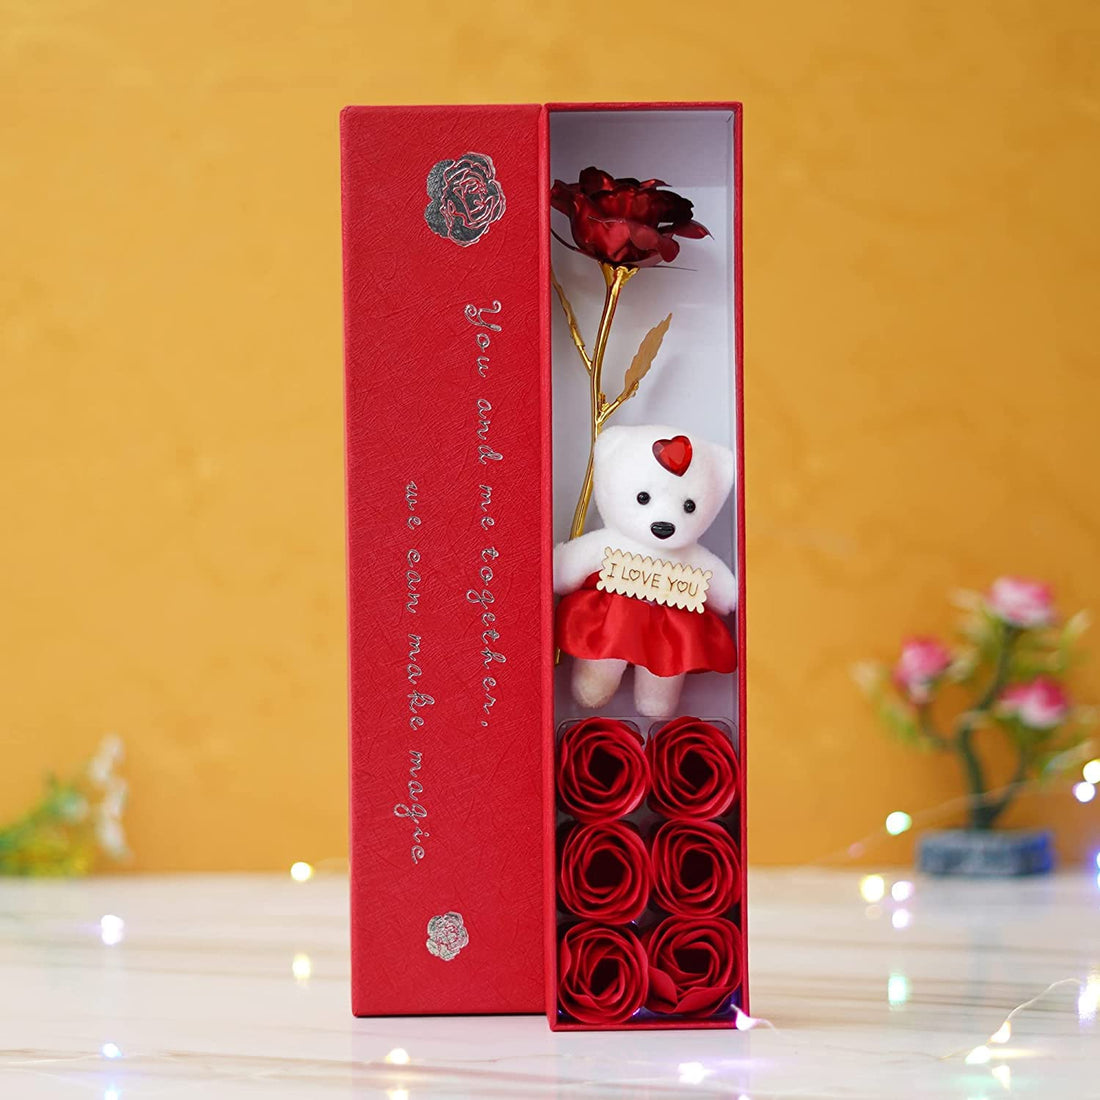 Premium Rose Flower with Teddy & Rose Petals in Luxury Gift Box